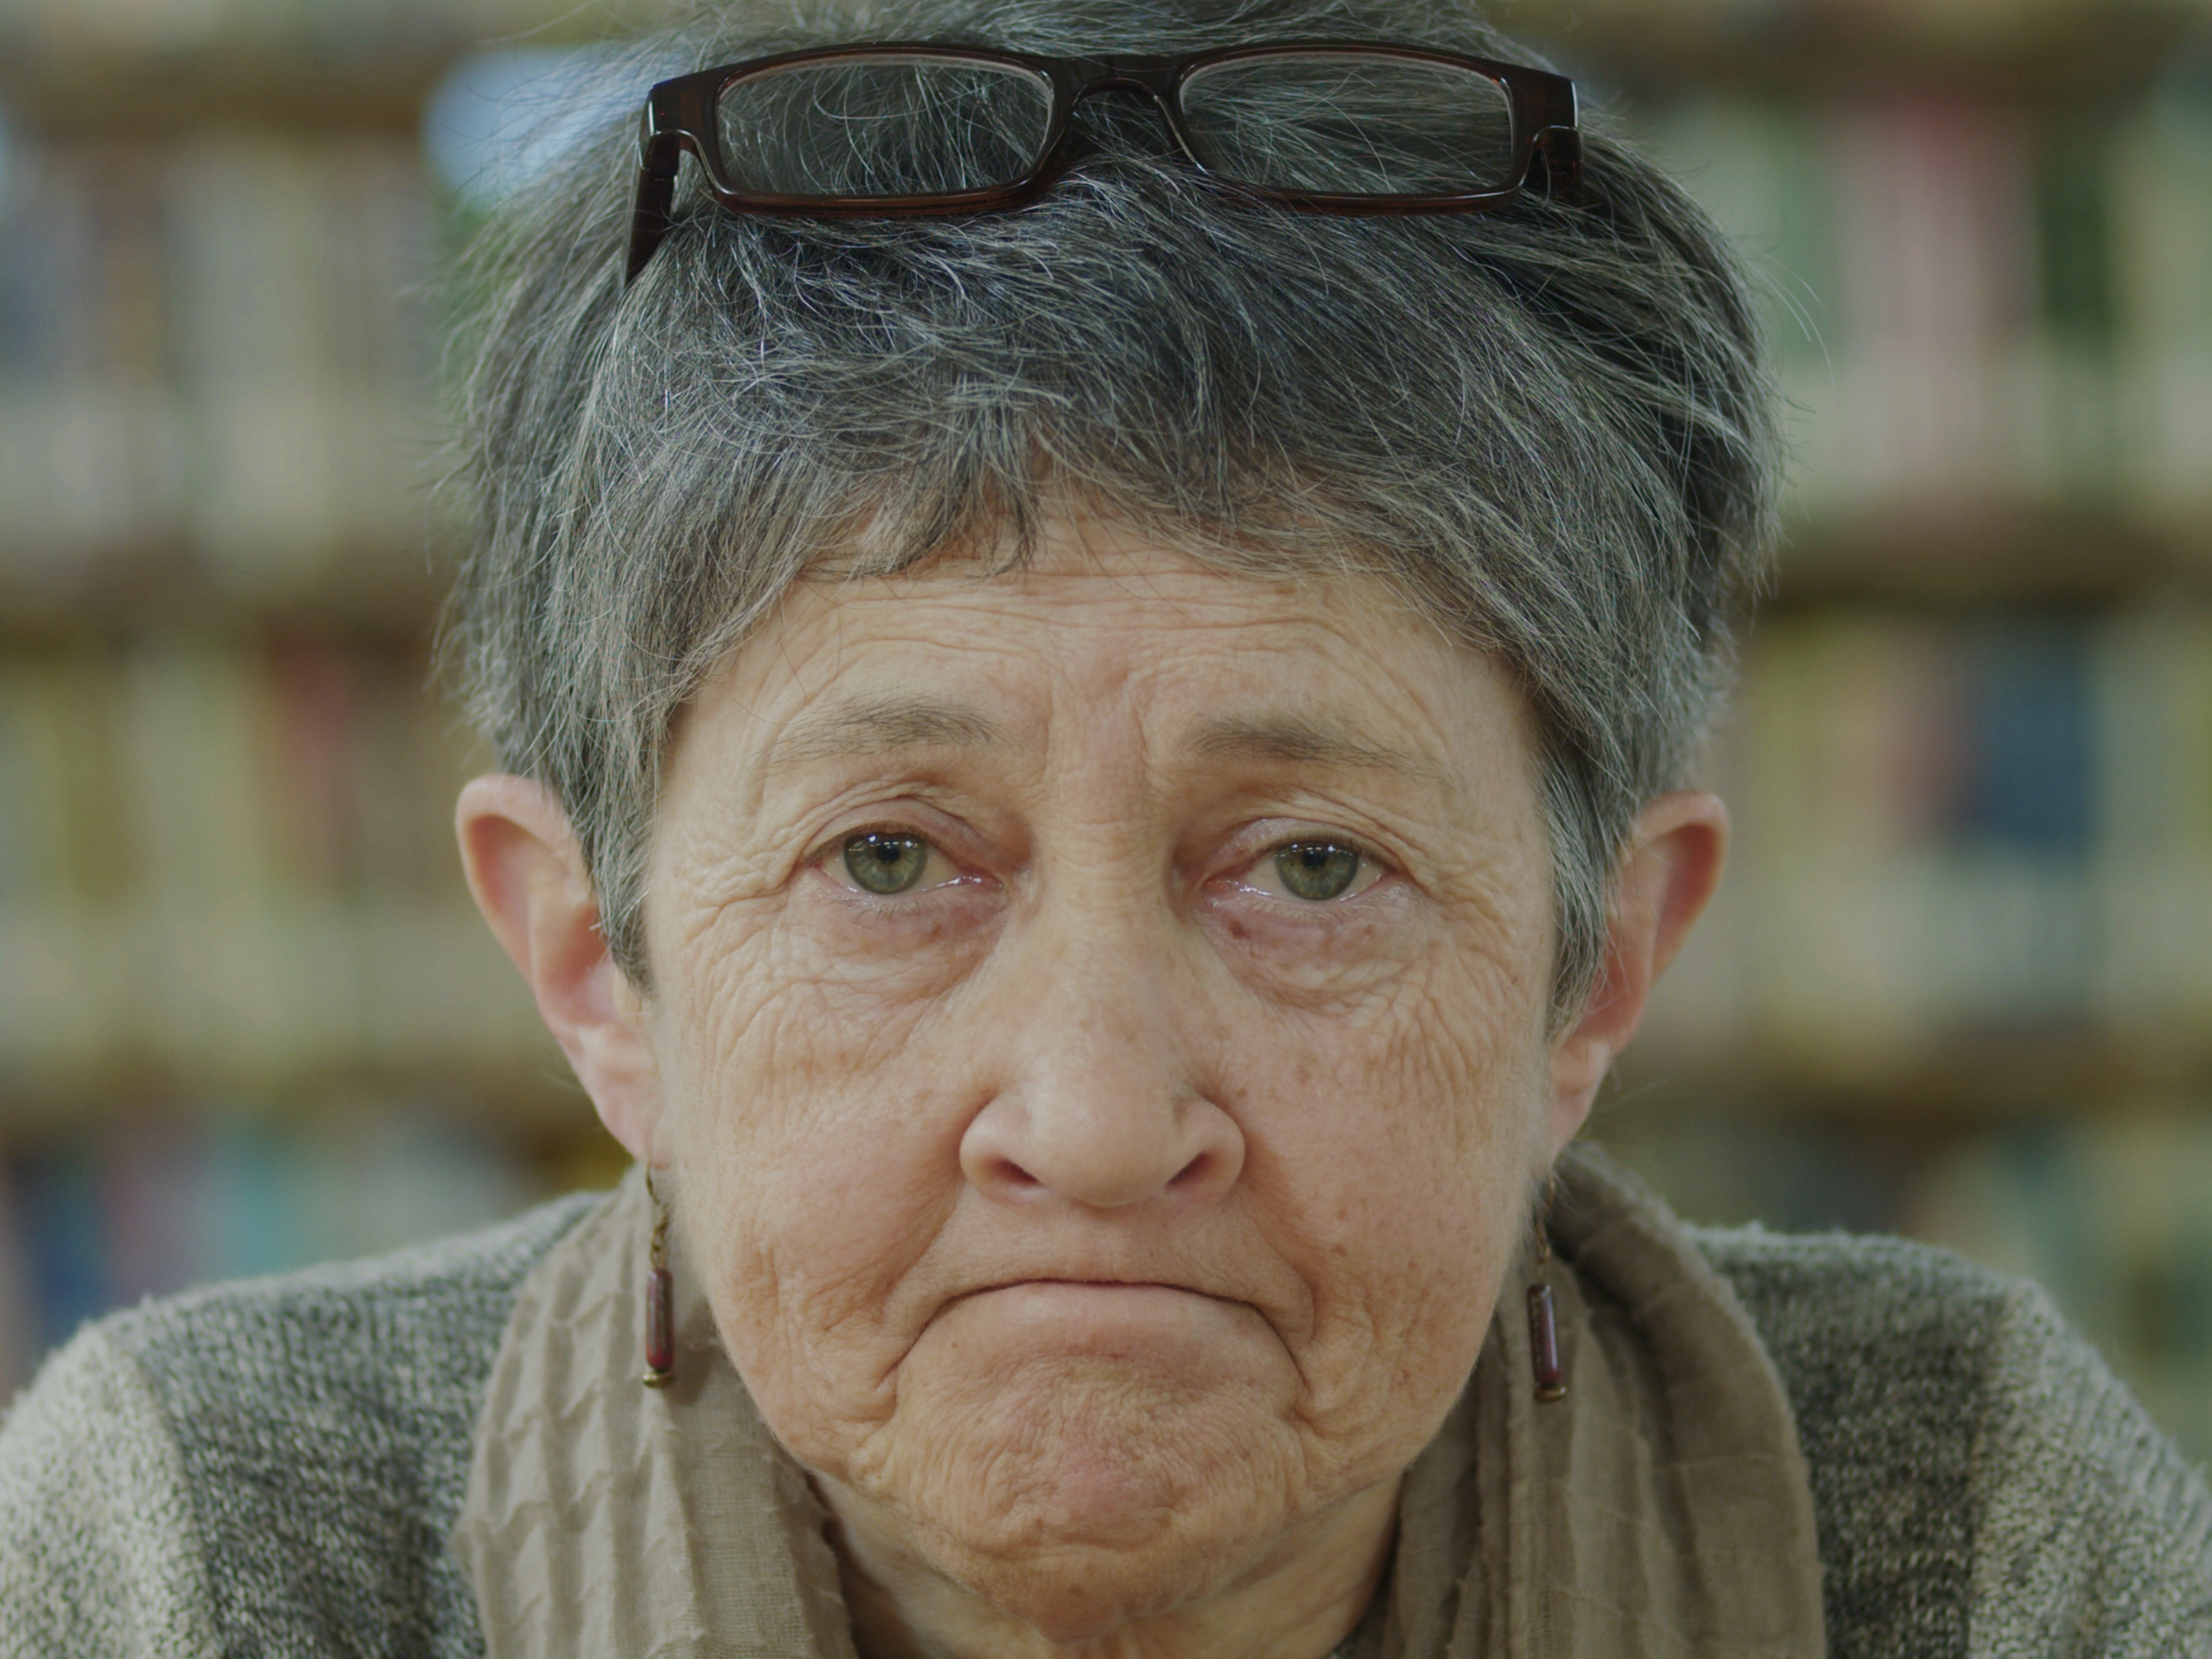 Woman in library frowning.